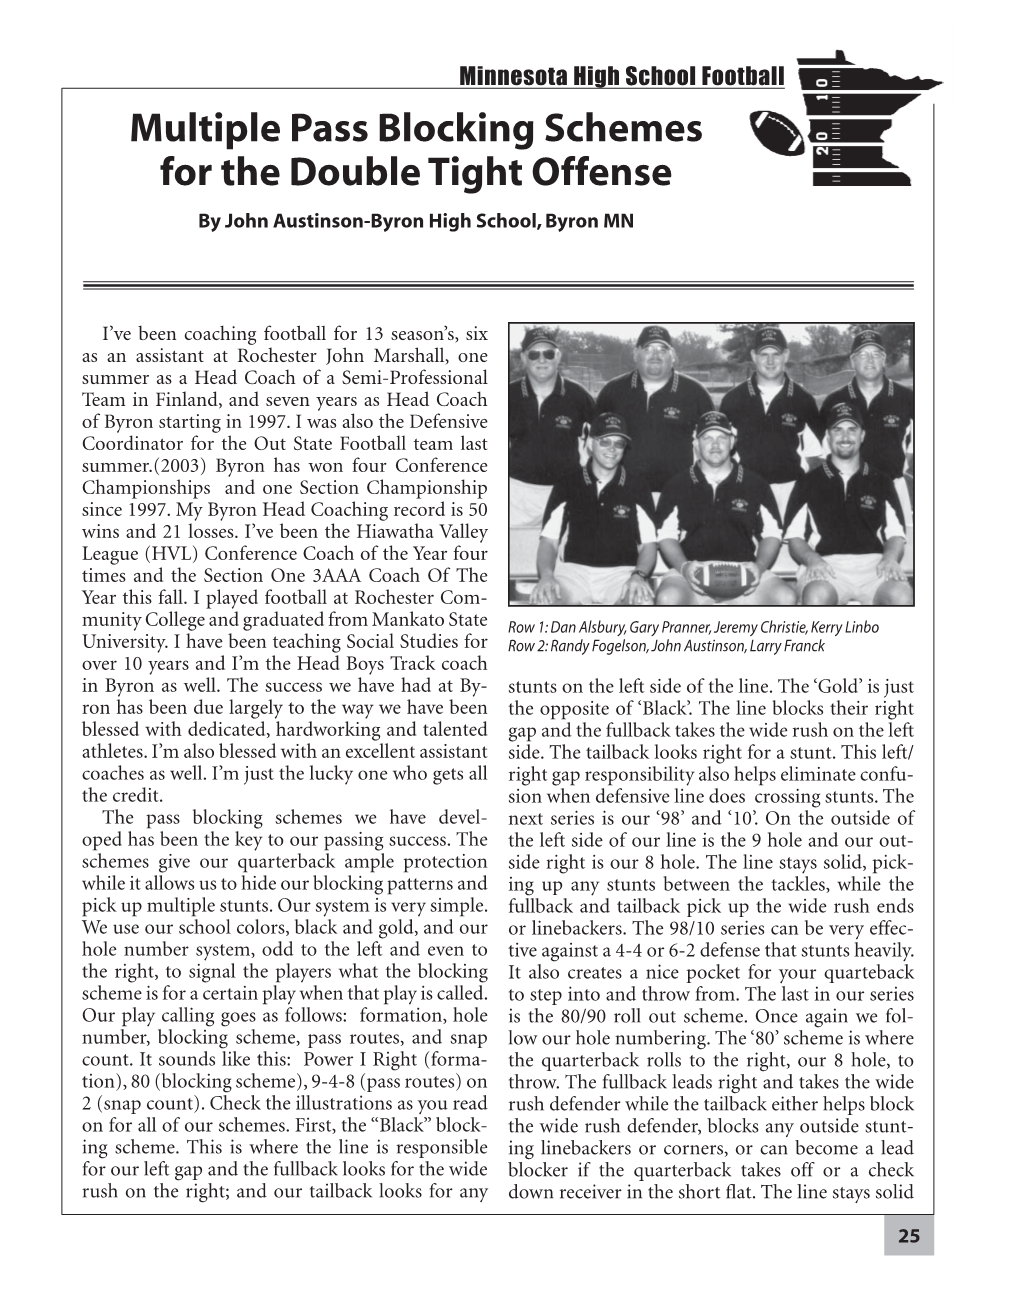 Multiple Pass Blocking Schemes for the Double Tight Offense by John Austinson-Byron High School, Byron MN